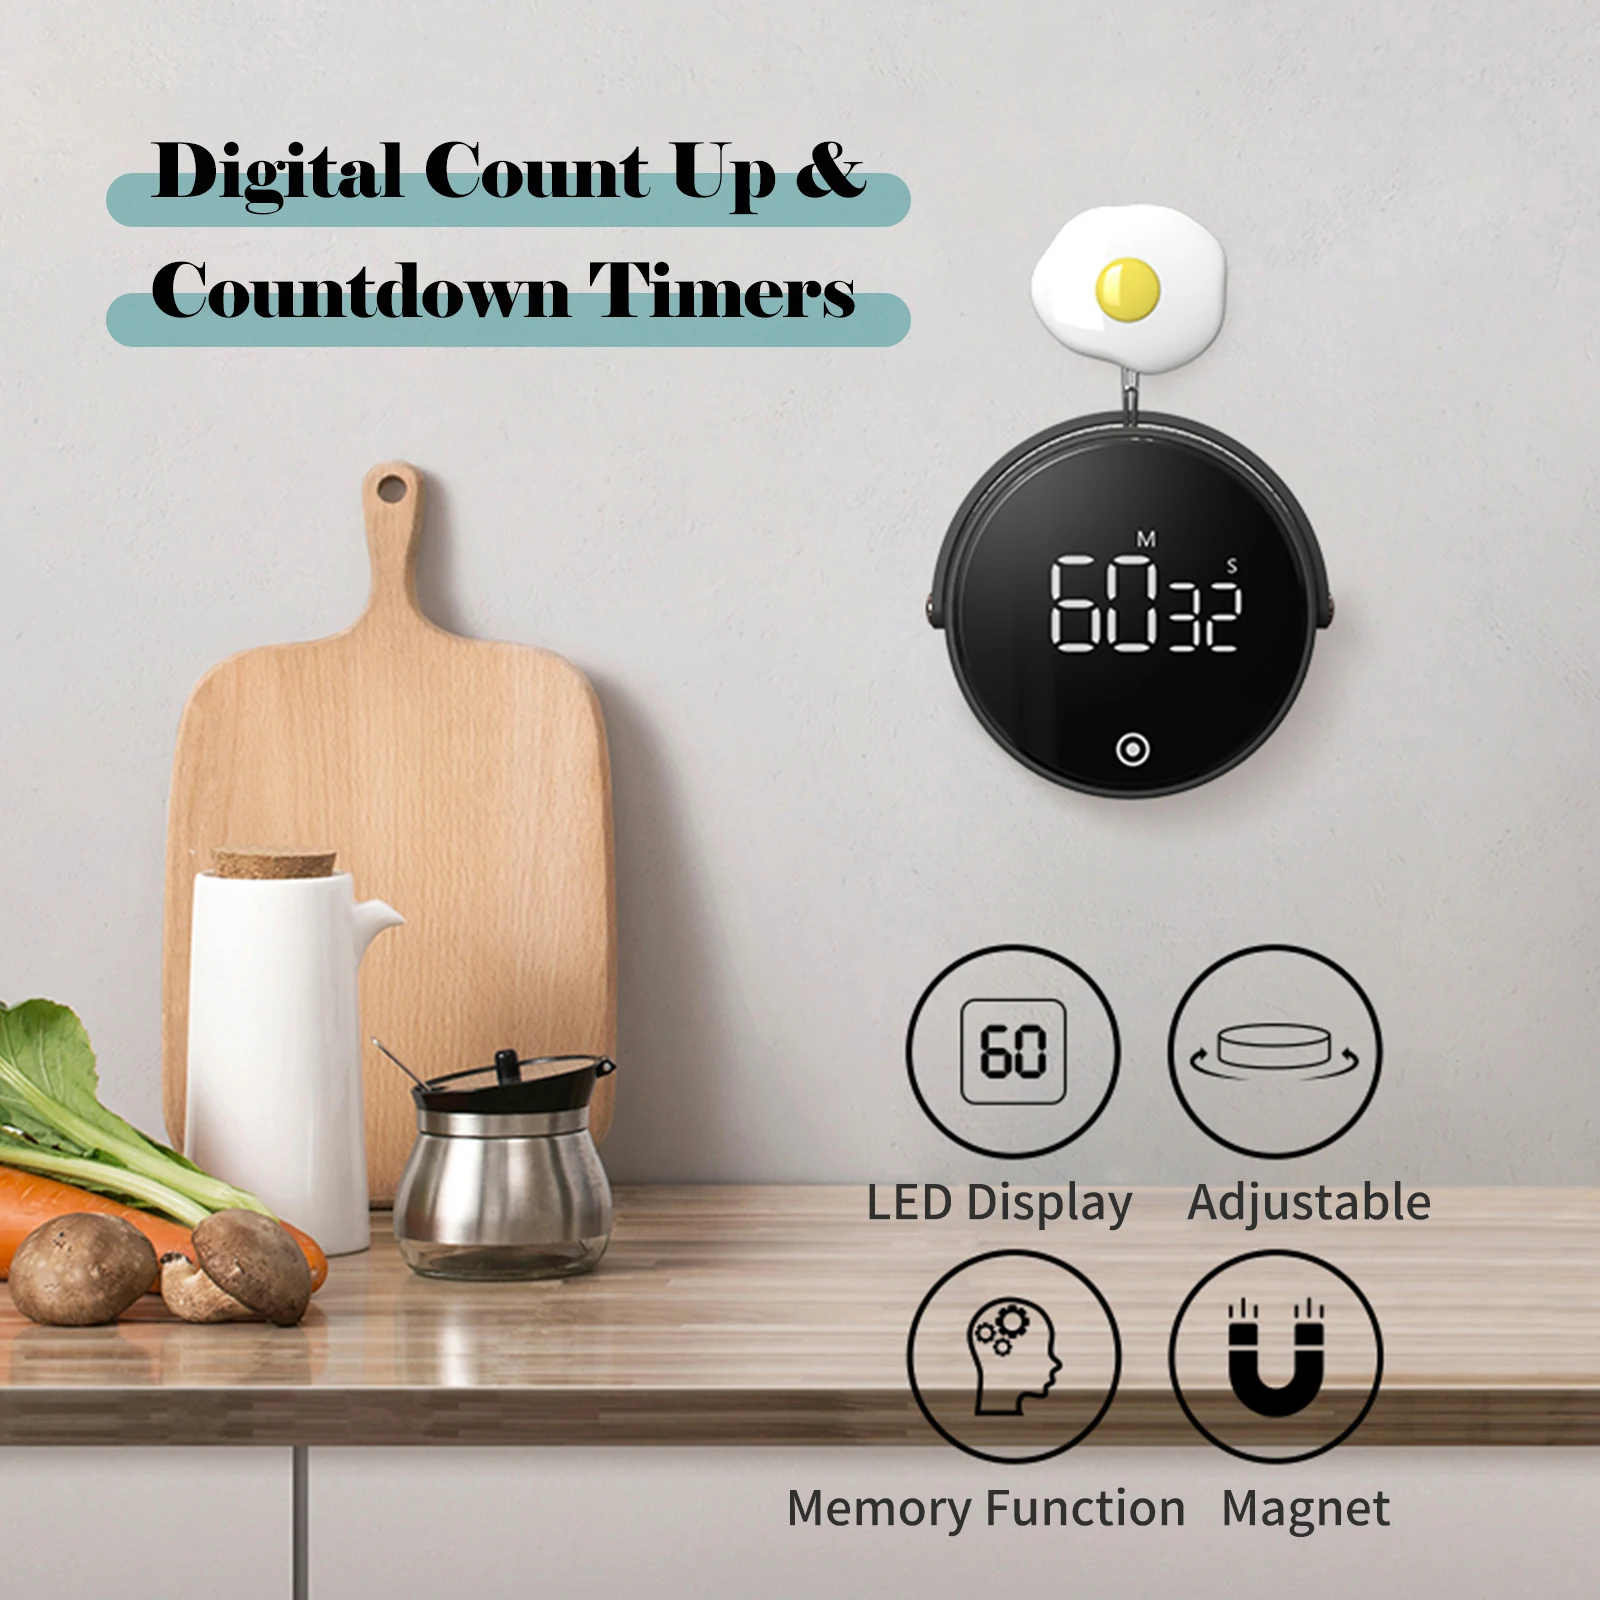 https://ae01.alicdn.com/kf/S96b30da1696f4e309d3758a3cb86d48eY/Desktop-Hanging-Timer-Kitchen-Parts-Magnet-99-Minute-Digital-Count-Up-Countdown-Timers-Angle-Adjustable-Cooking.jpg